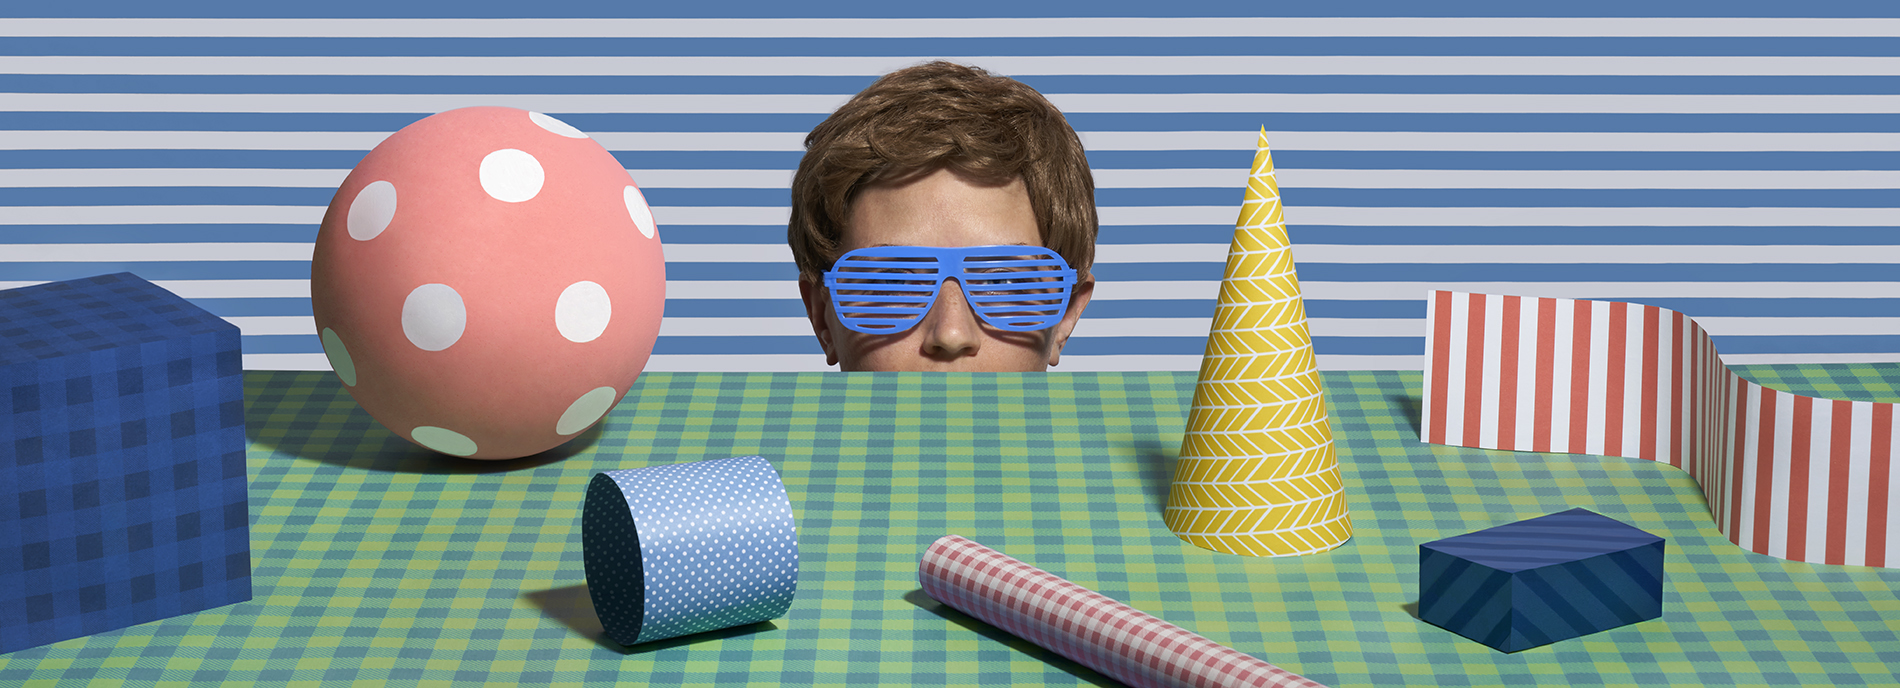 Humorous photograph shows a young man with plastic sunglasses on that match the patterns around him, surveys a tabletop scene of patterned objects.